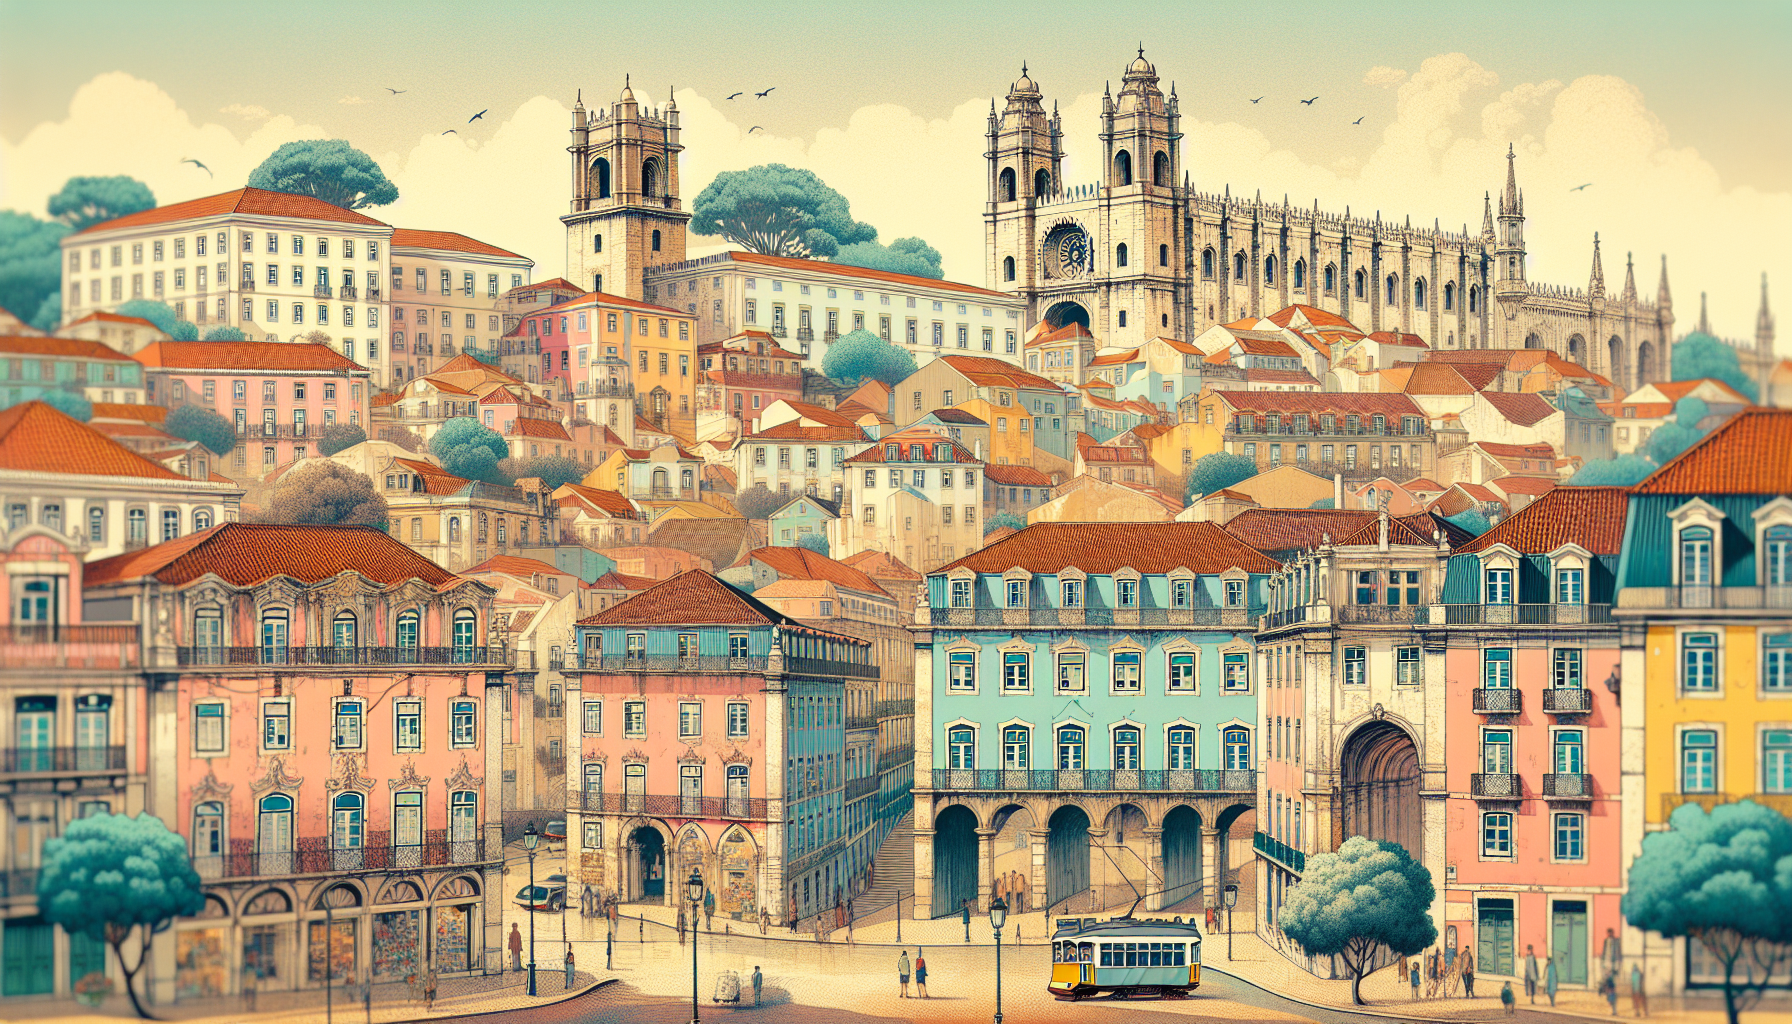 discover the top destinations in europe and immerse yourself in the rich history of lisbon, portugal. plan your visit now!